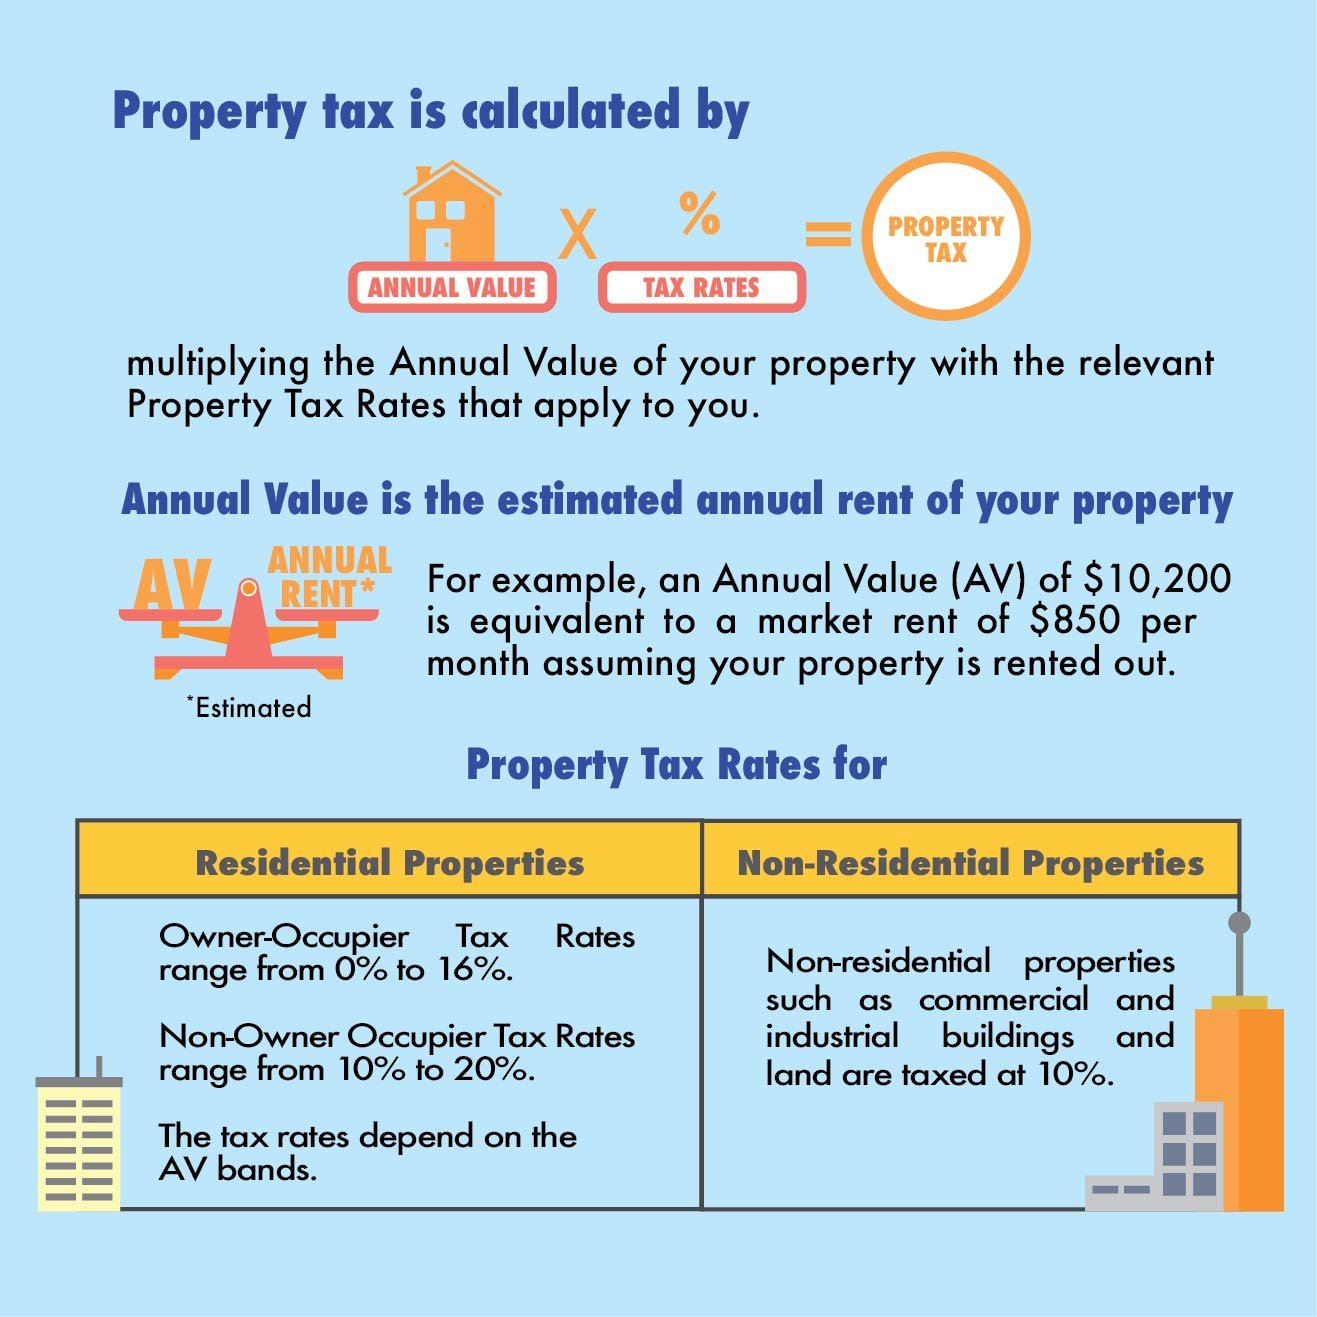 Property tax is calculated by Annual Value (AV) x Tax Rates. AV is the estimated annual rent of the property. There are different tiers of property tax rates for residential and non-residential properties.